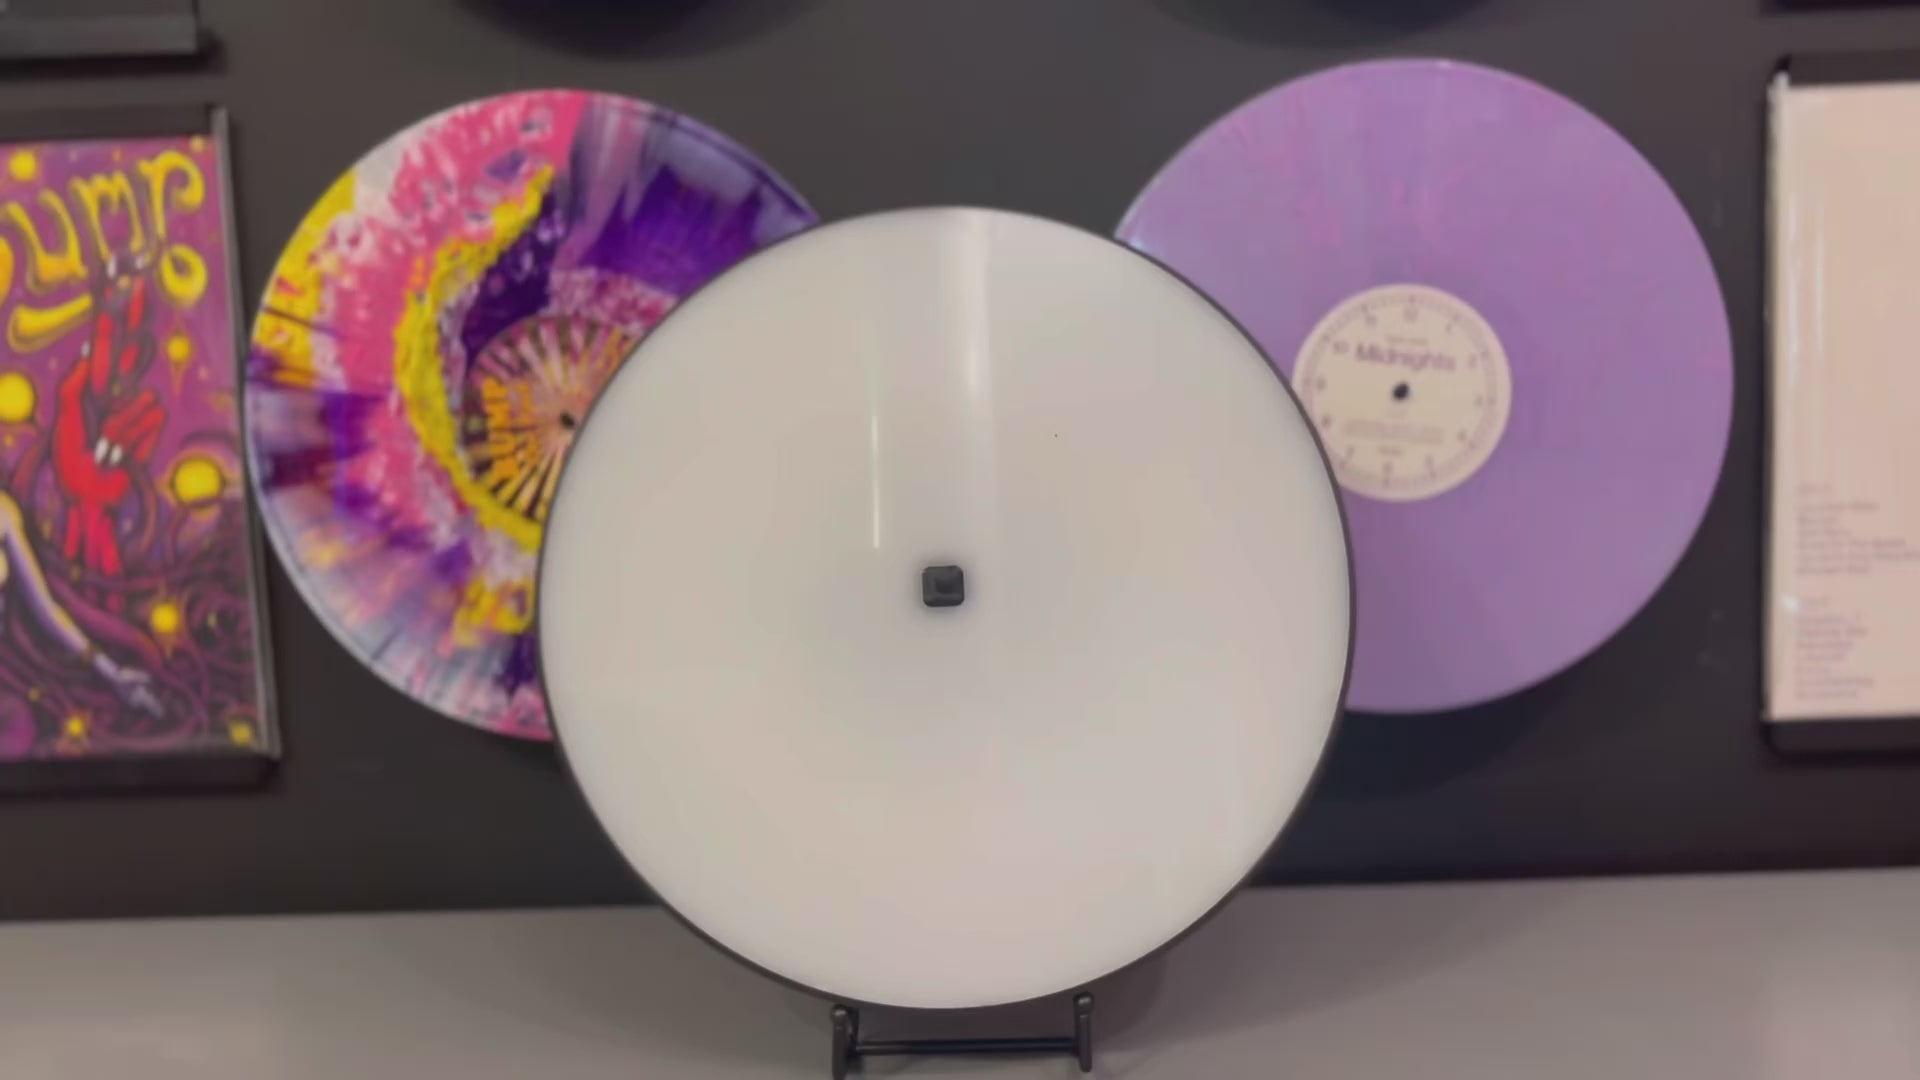 Load video: Putting a colored vinyl record on a light display